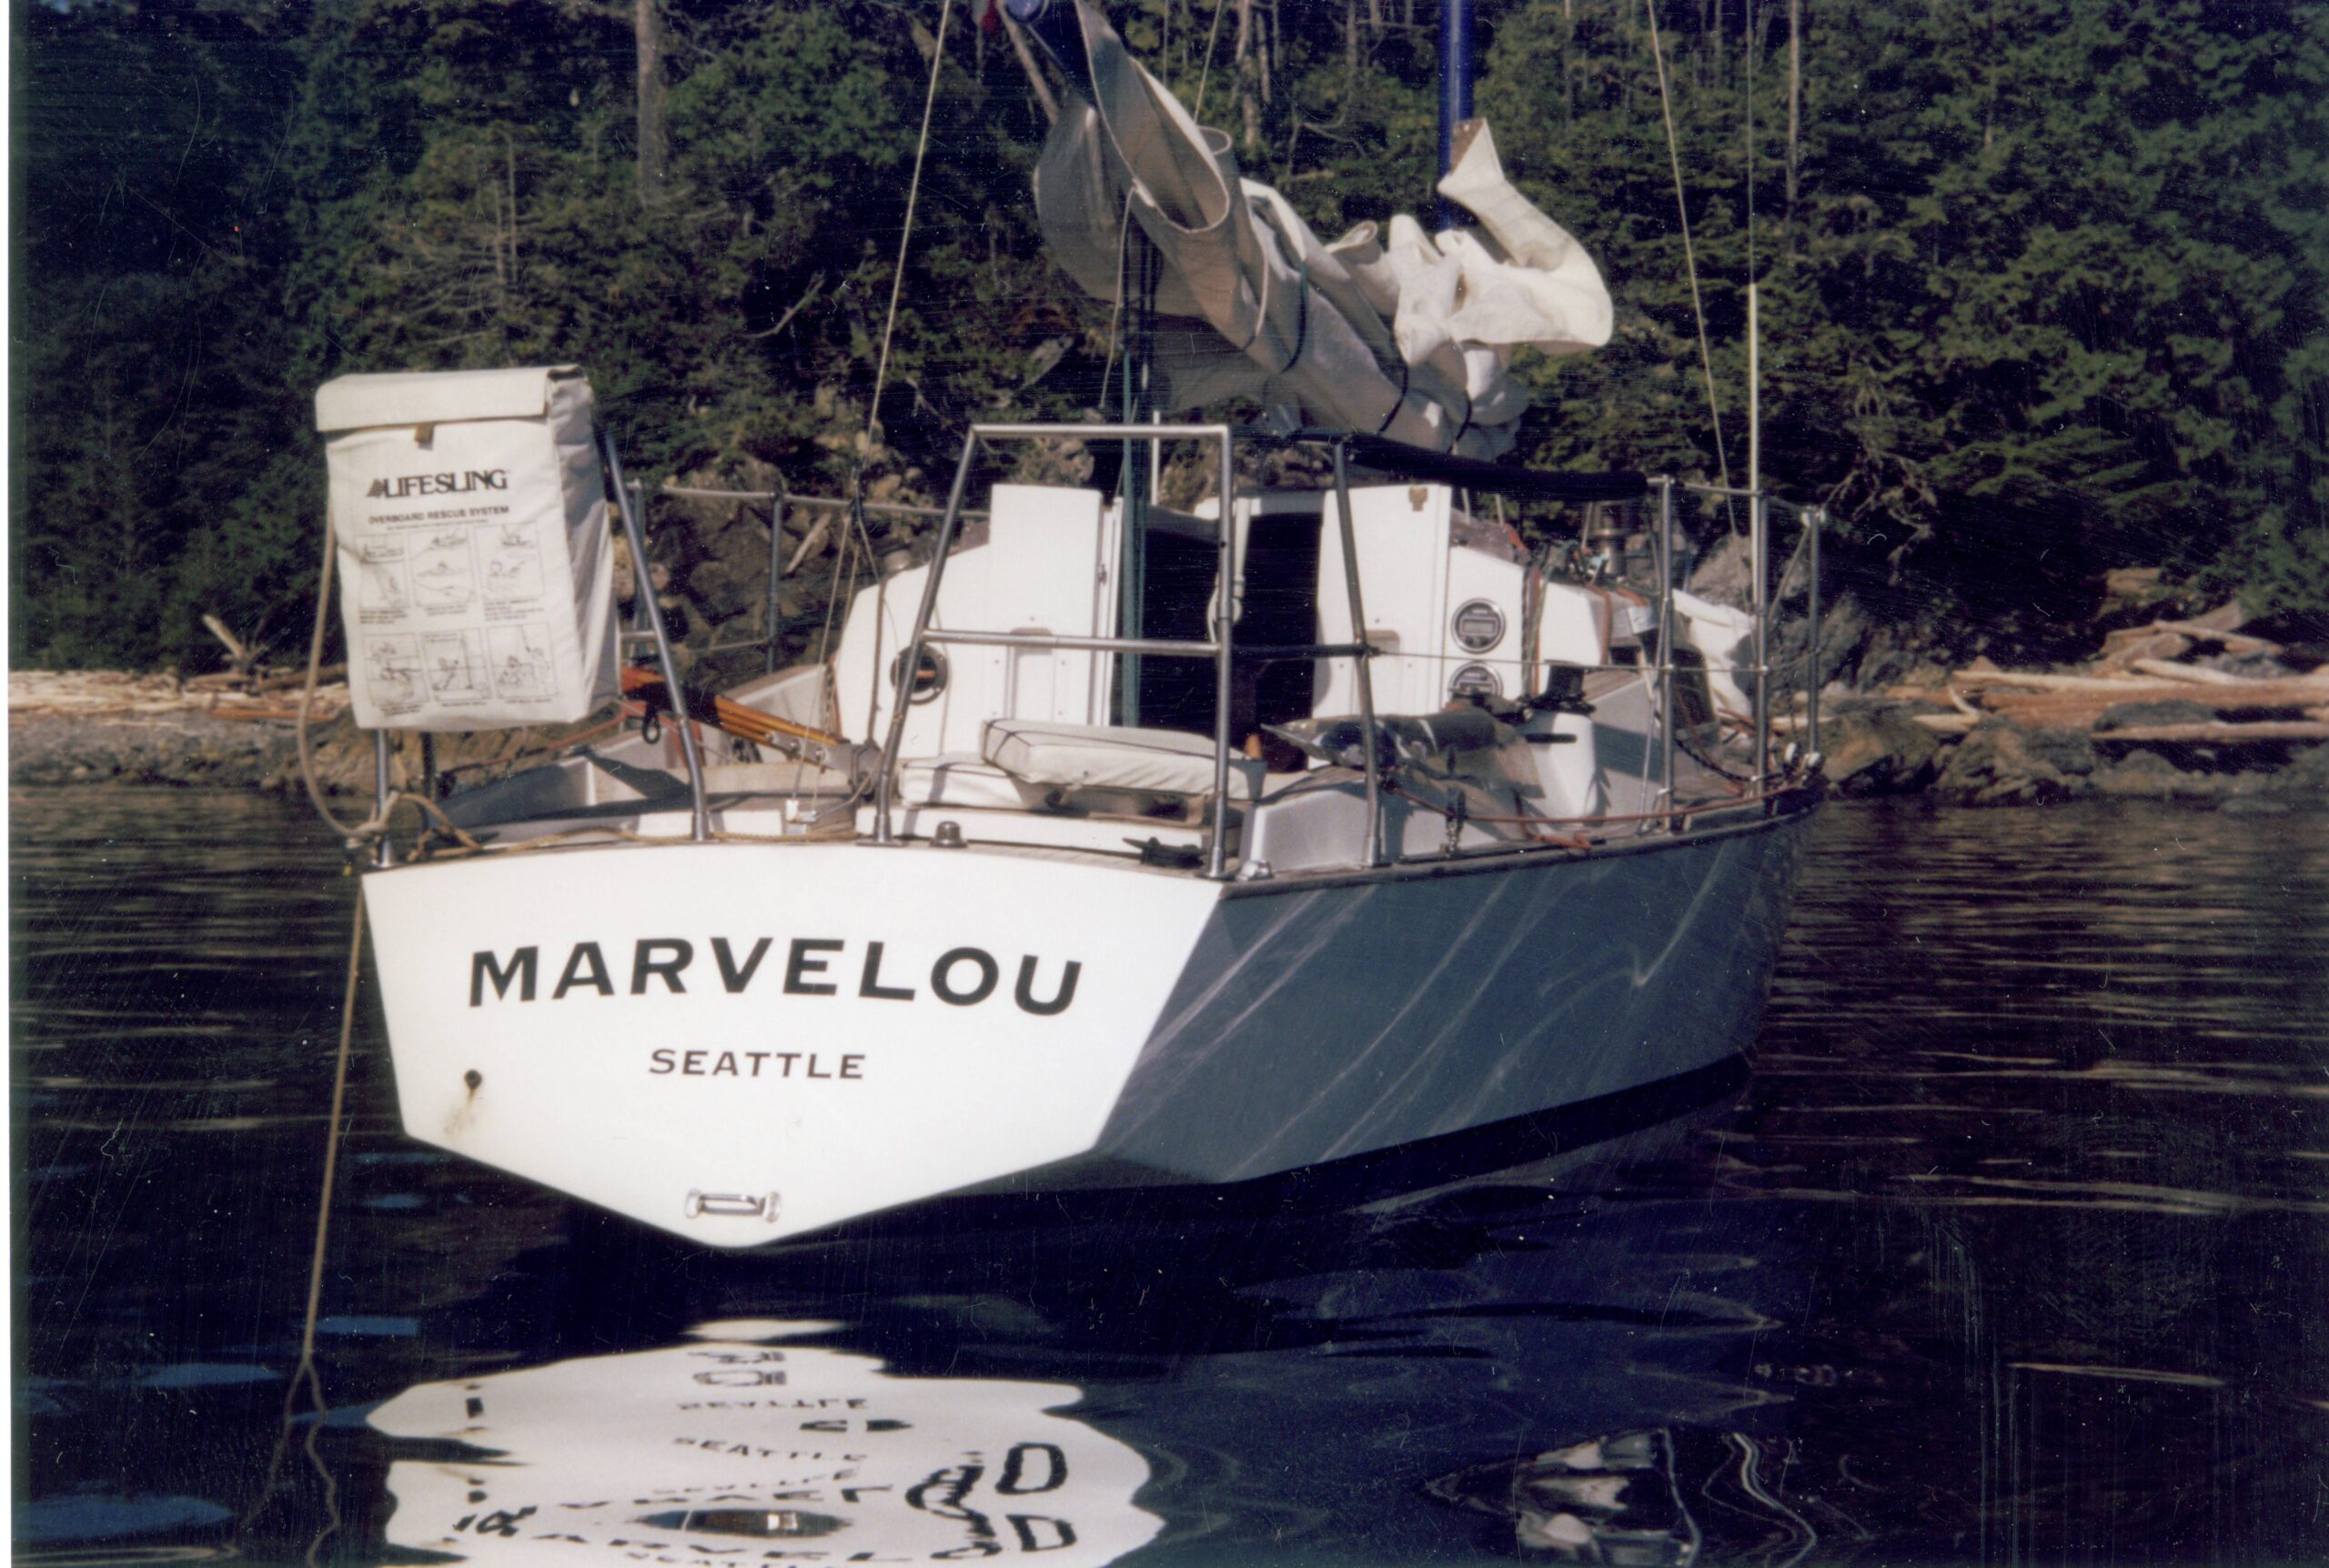 sv Marvelou, 2 year build, launched 1984, logged 20K miles over 22 years of coastal sailing, sold in 2005